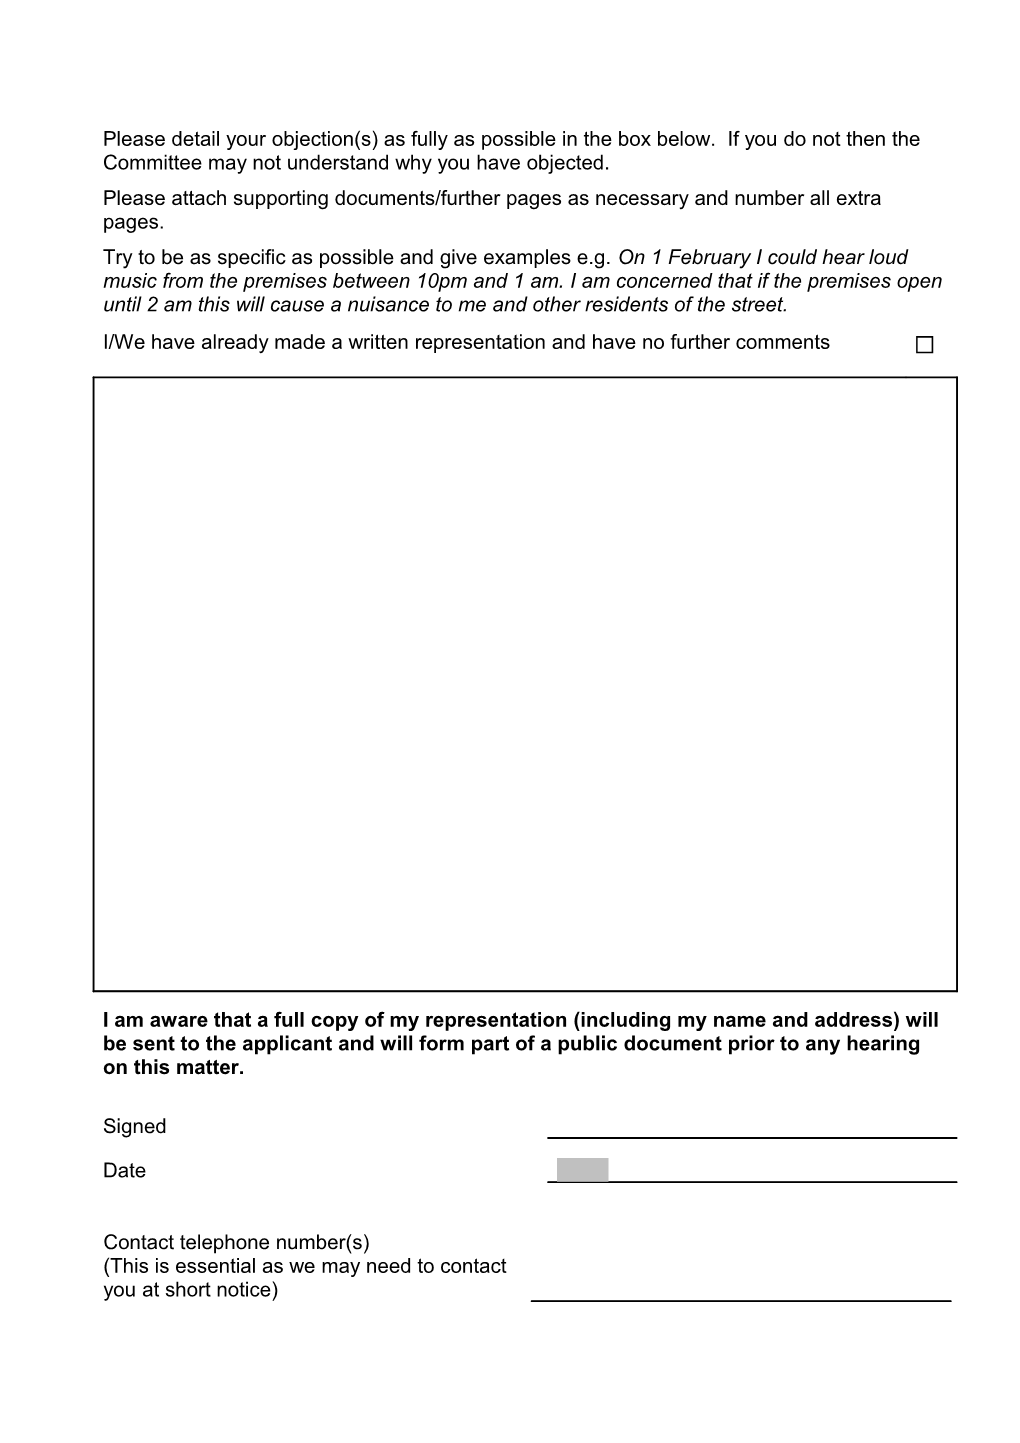 Please Read the Notes at the Back of This Form Prior to Completing It